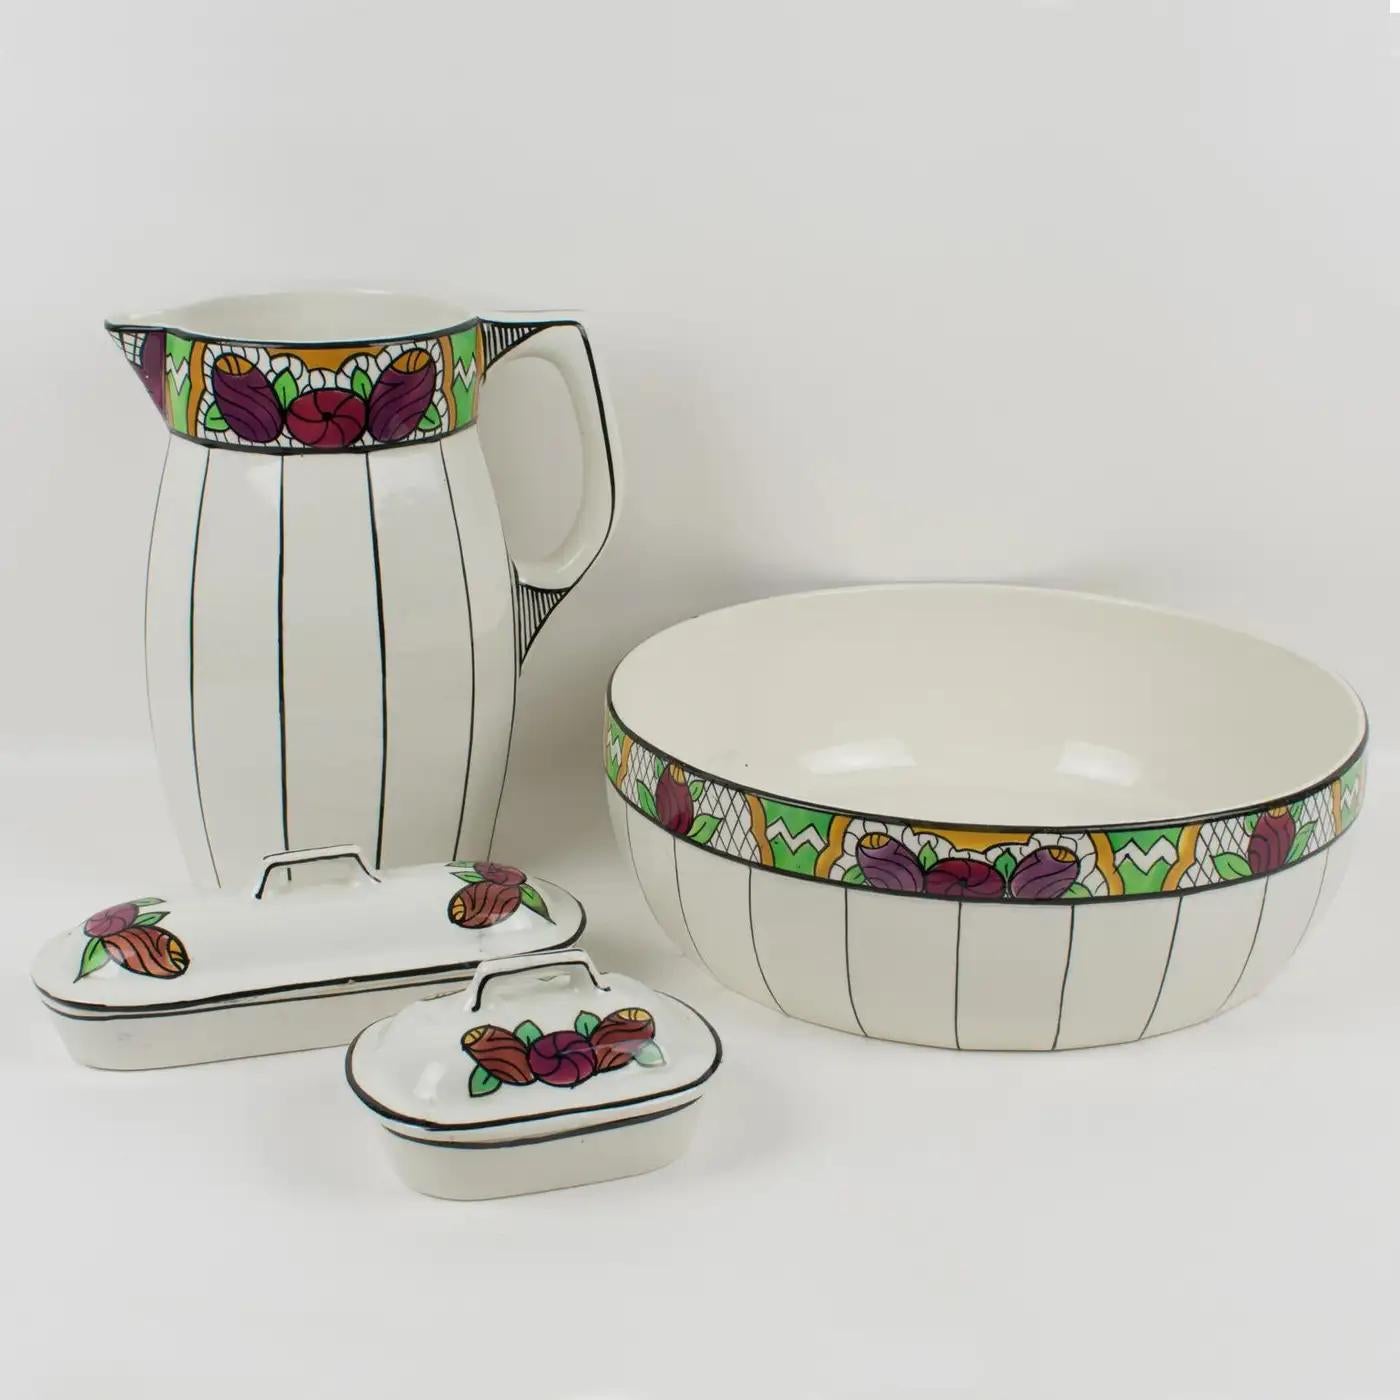 Auguste Mouzin et Cie, Belgium, designed and manufactured this lovely Art Deco bedroom or dresser ceramic set. The set comprised four ceramic pieces: a pitcher, a large basin bowl, a soap-lidded dish, and a comb-lidded holder box. Those sets were